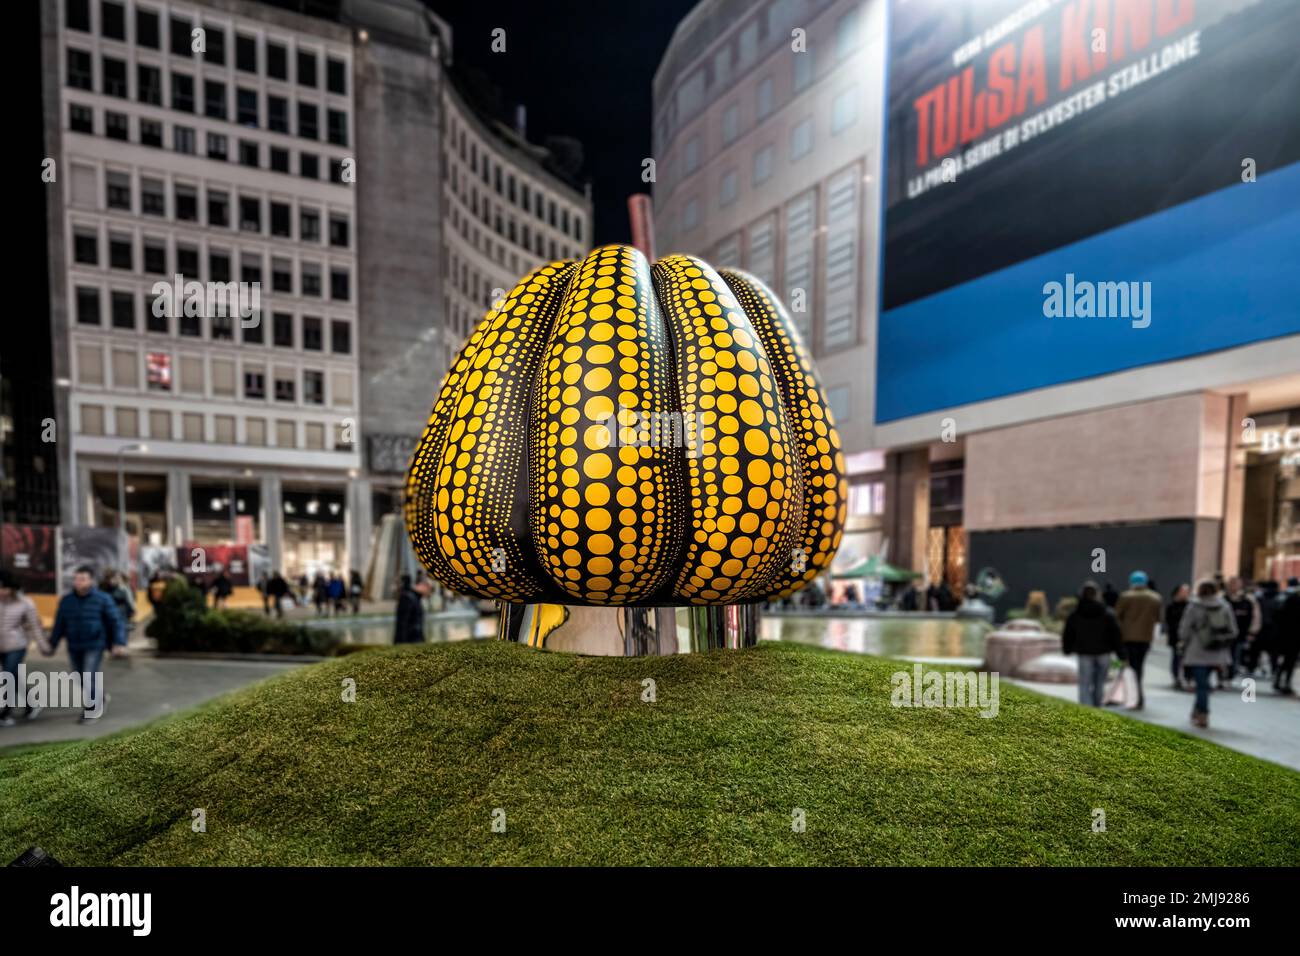 Yellow and black dotted pumpkin, made by Yayoi Kusama and temporarily installed in San Babila square in early 2023, Milan city center, Italy Stock Photo